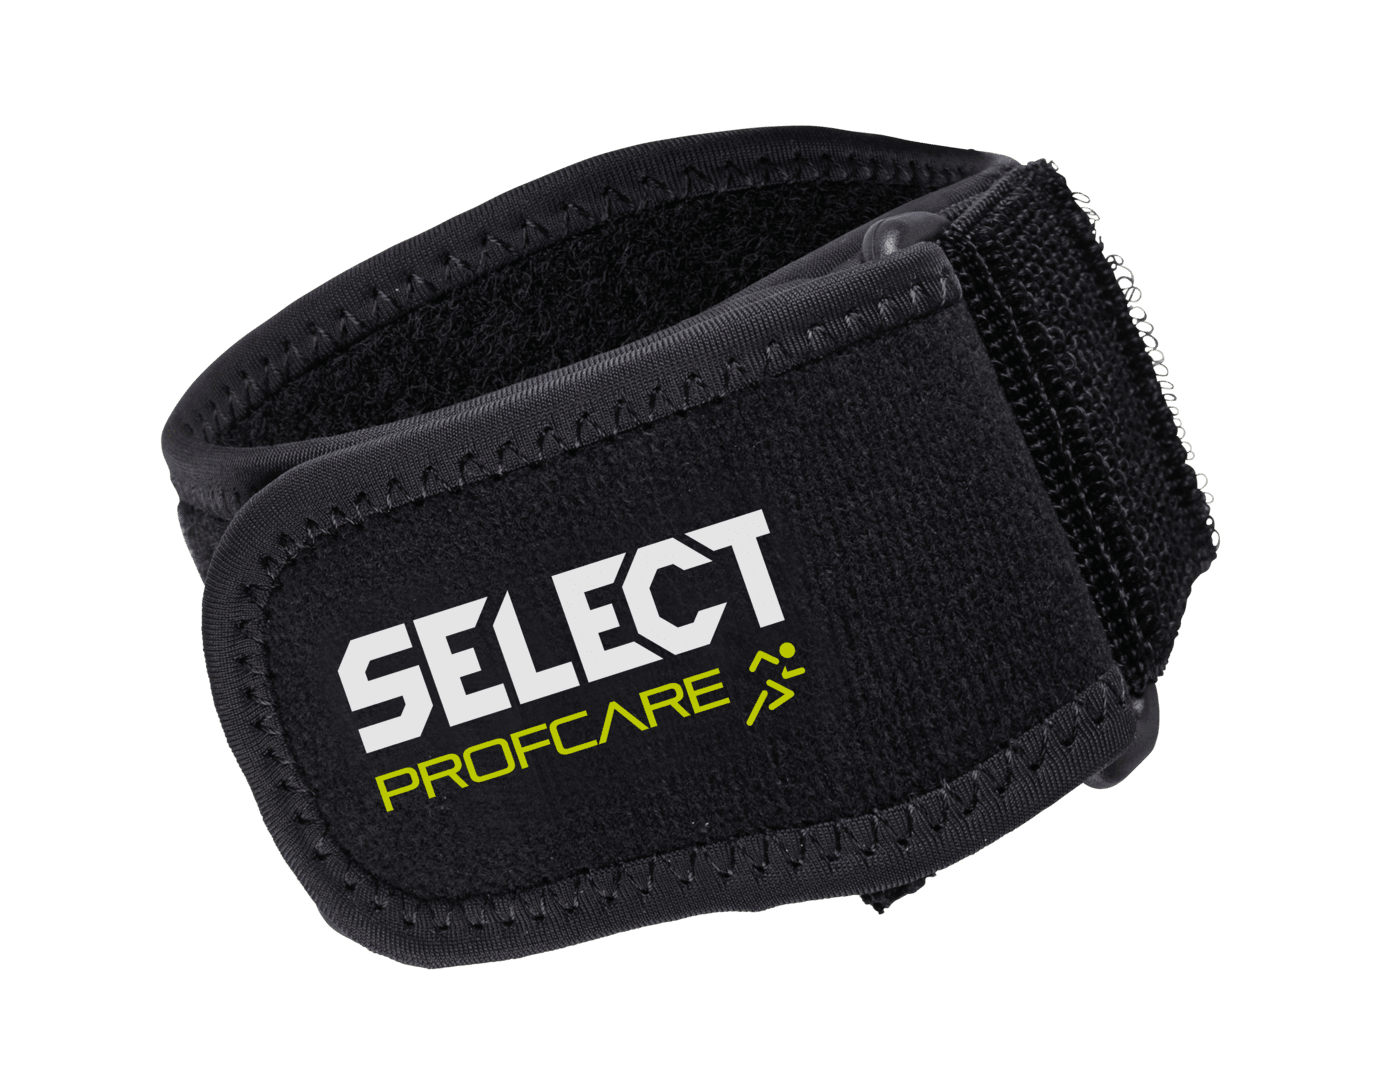 700047_black_Tennis_golf_mouse_Elbow_Support_Profcare